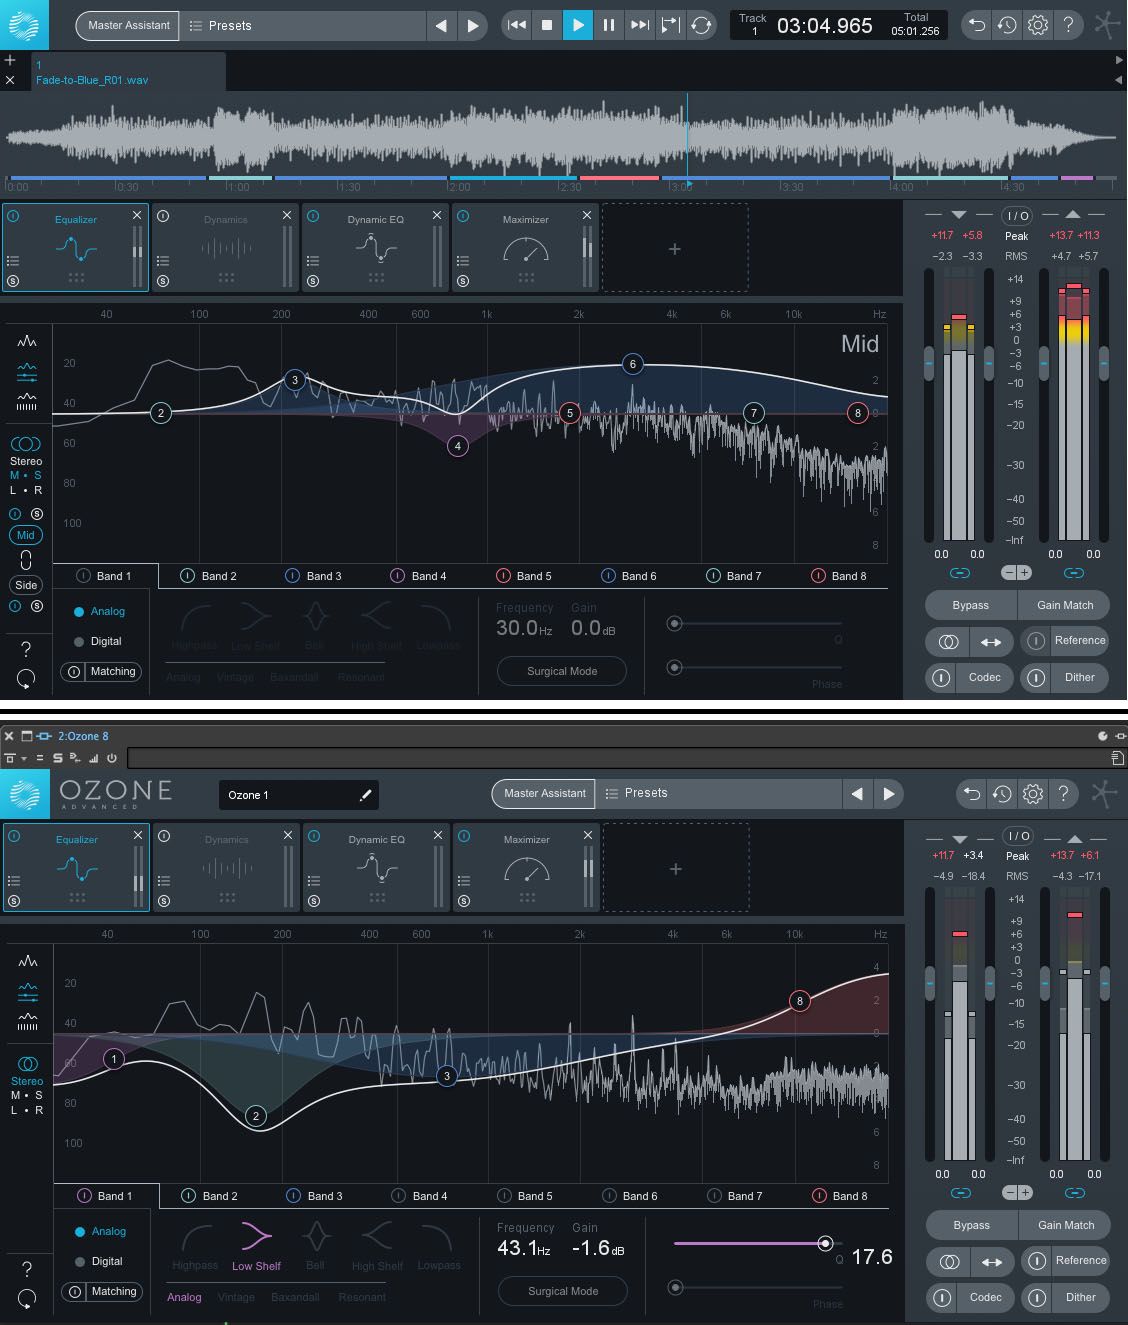 izotope insight review